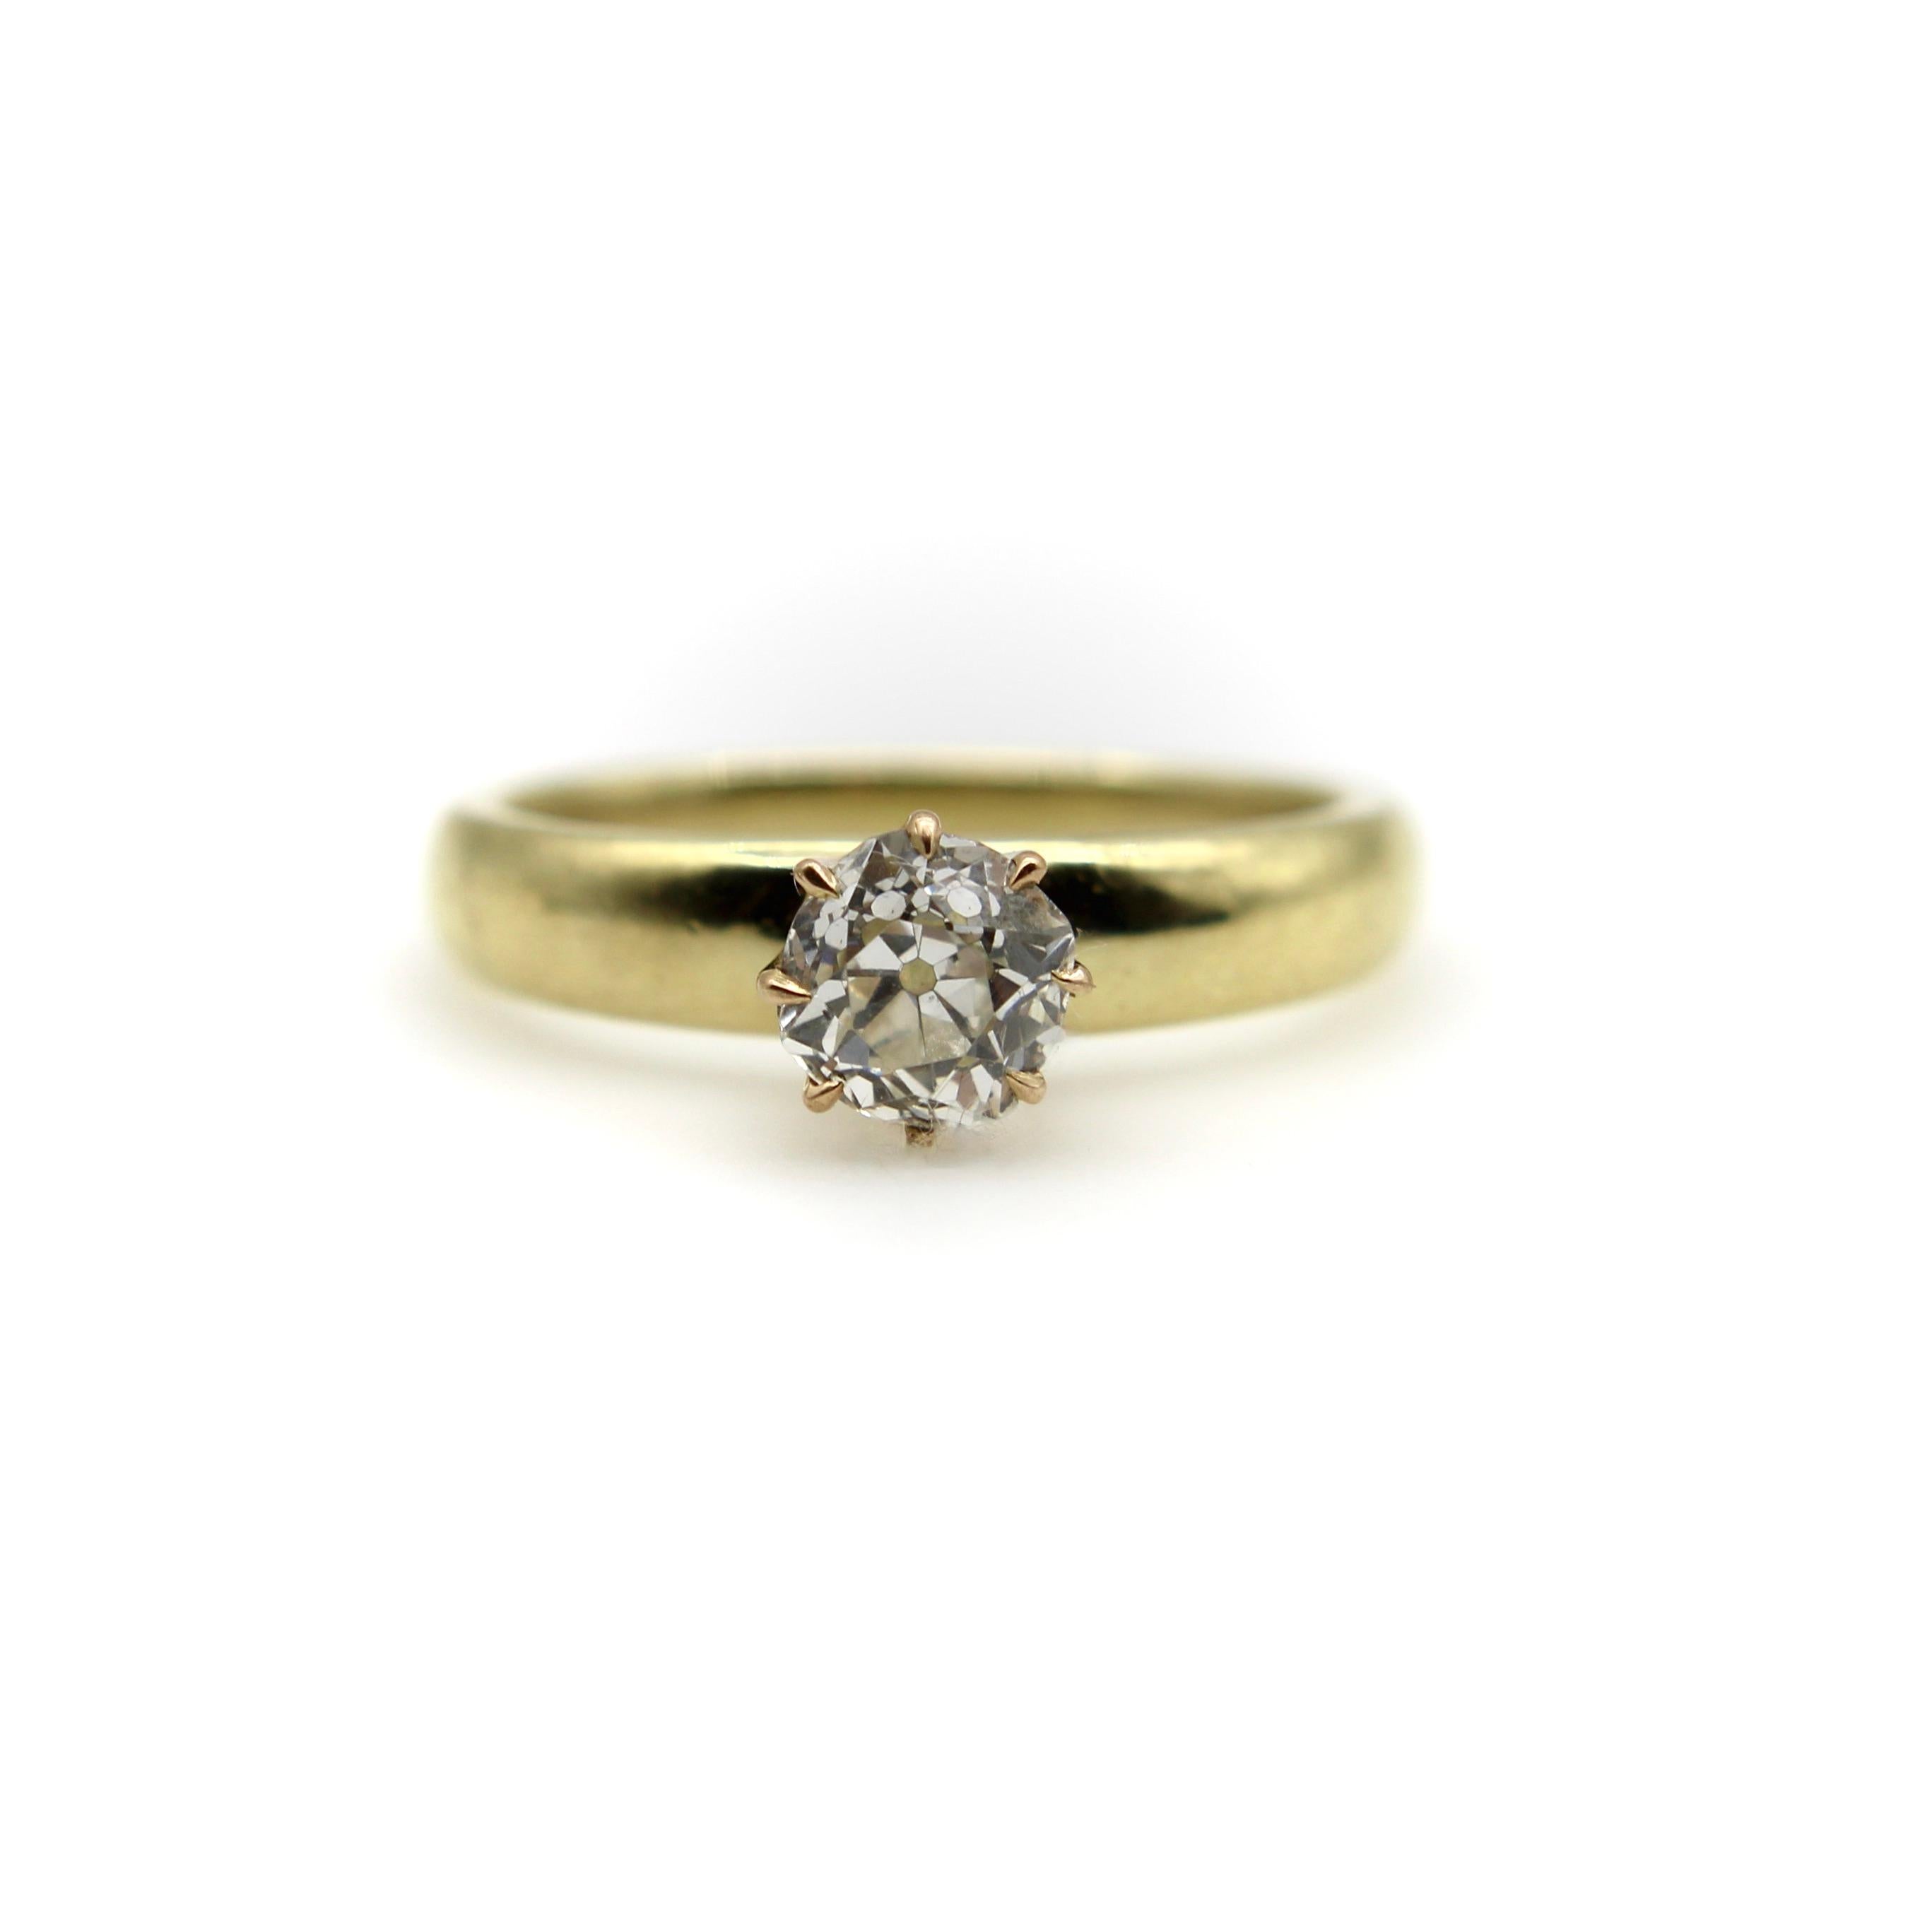 Part of Kirsten’s Corner Signature Collection, we took an existing diamond from a Victorian brooch and had an 18k gold band made to compliment the stone. The stunning Old Mine Cut diamond has the chunky shape, large sparkly facets, and beautiful